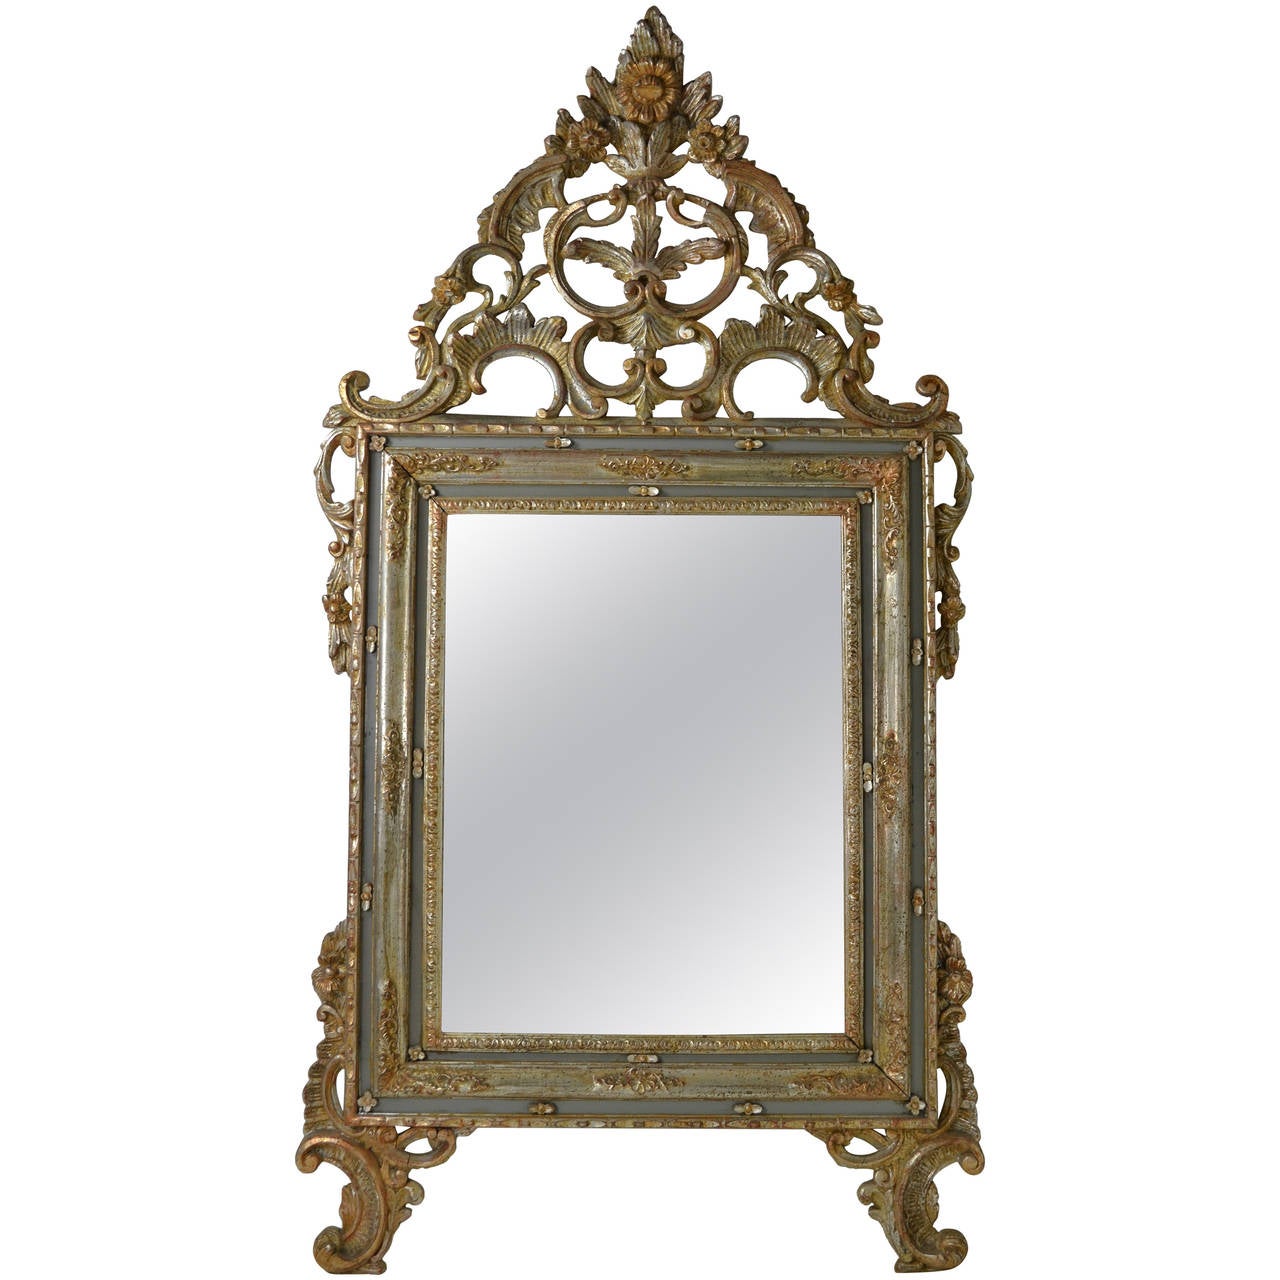 Large Italian Rococo Giltwood Mirror For Sale at 1stdibs